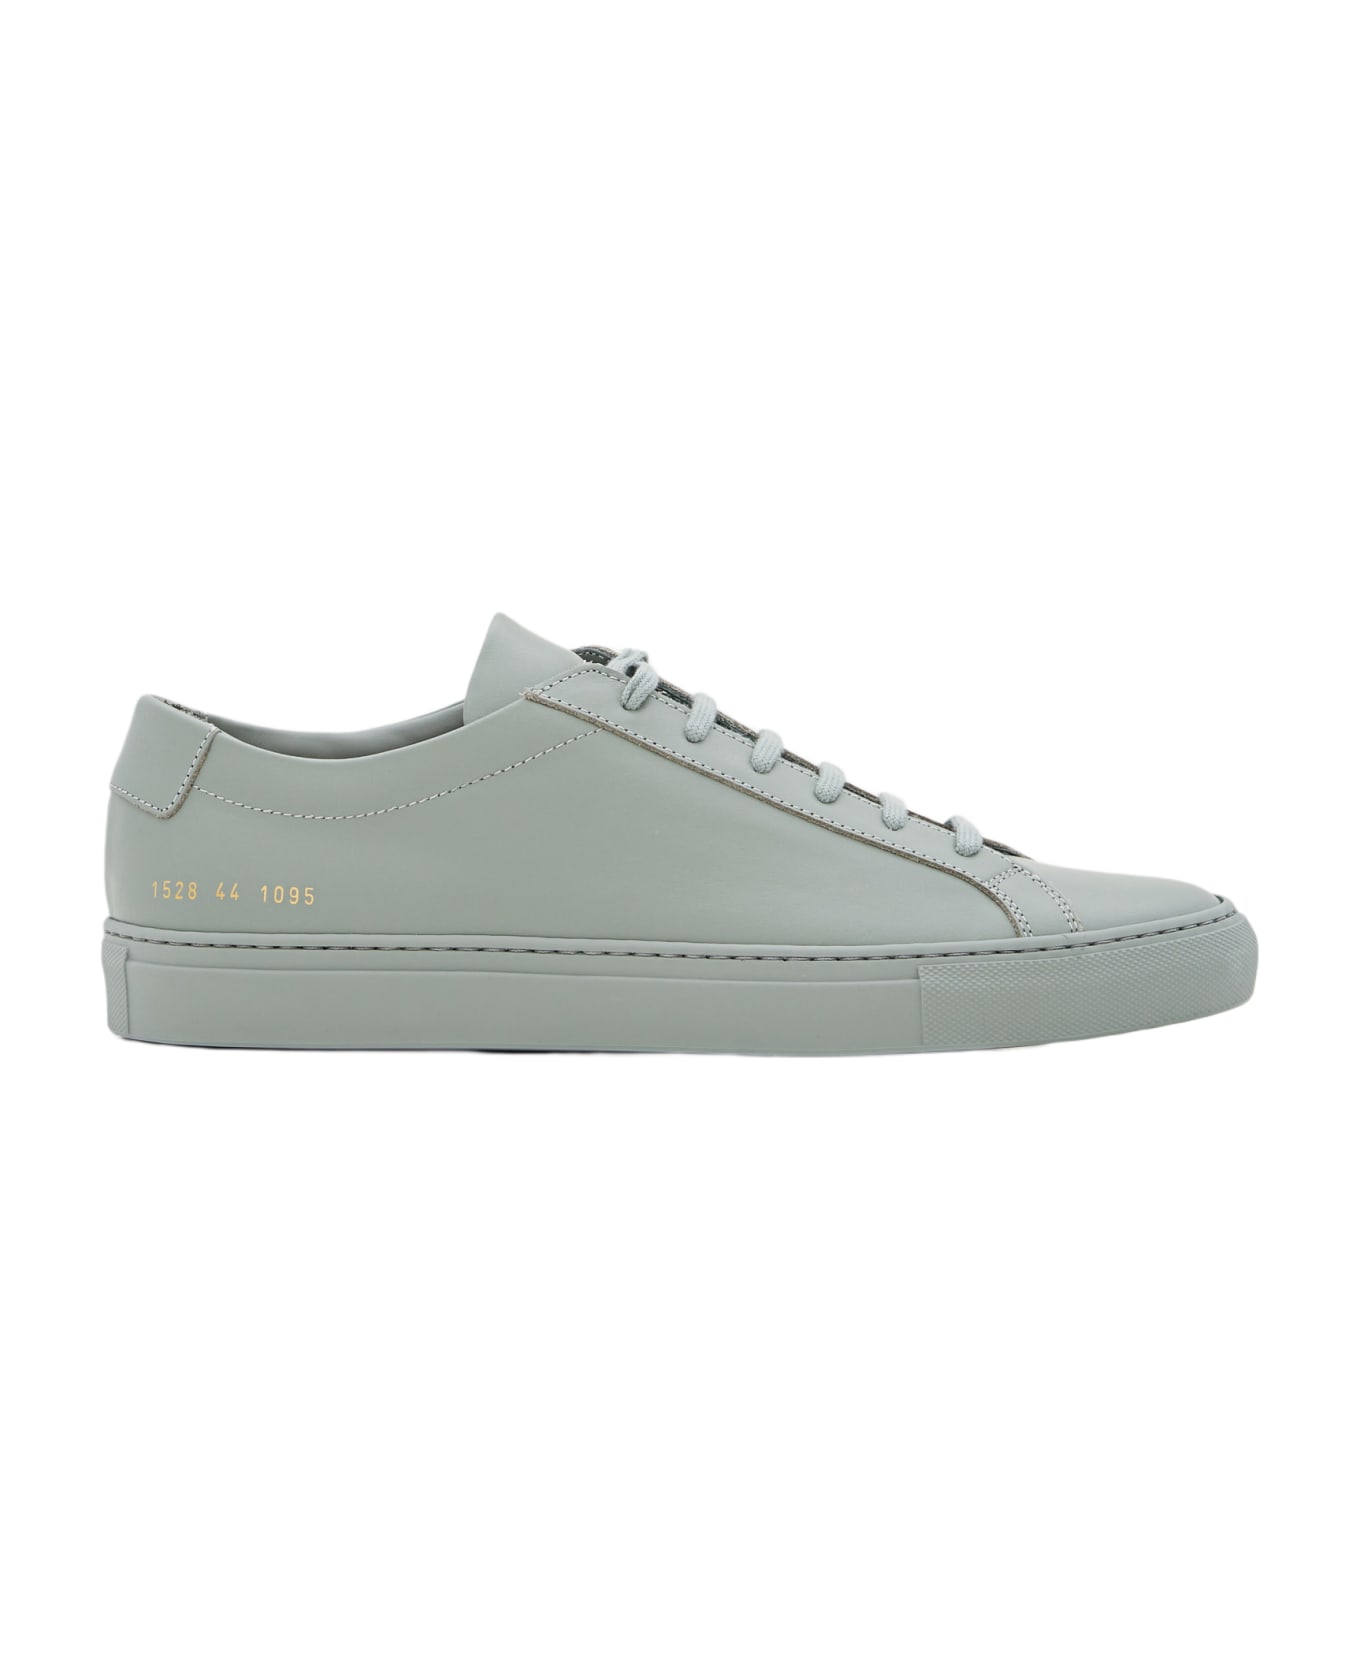 Common Projects Original Achilles Low Sneakers - Green